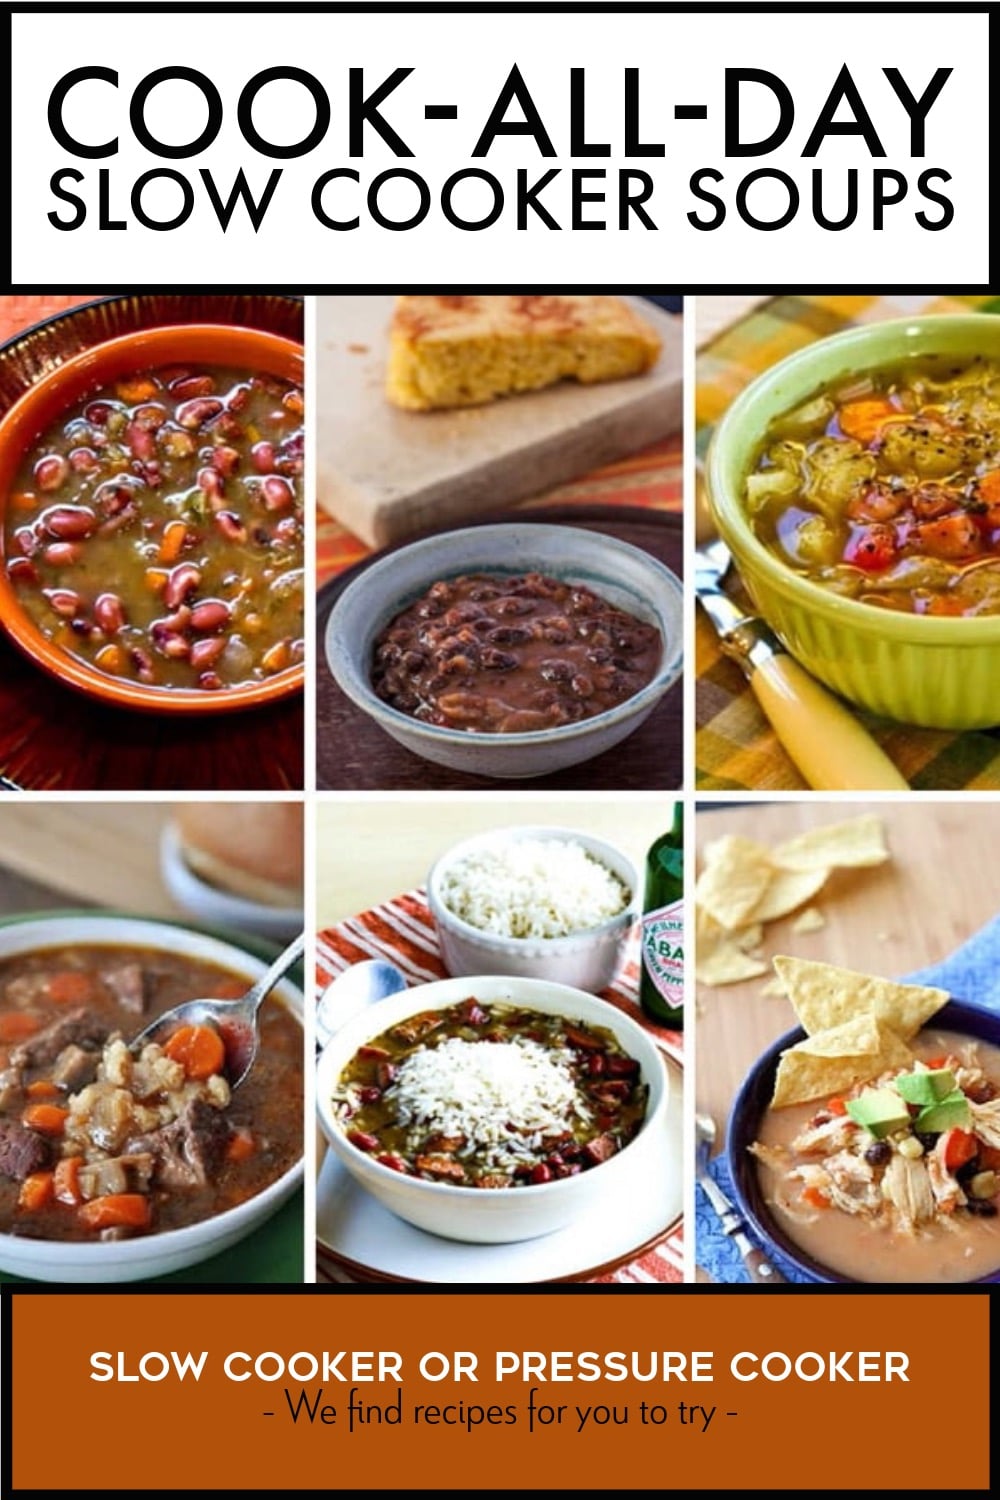 Pinterest image of Cook-All-Day Slow Cooker Soups